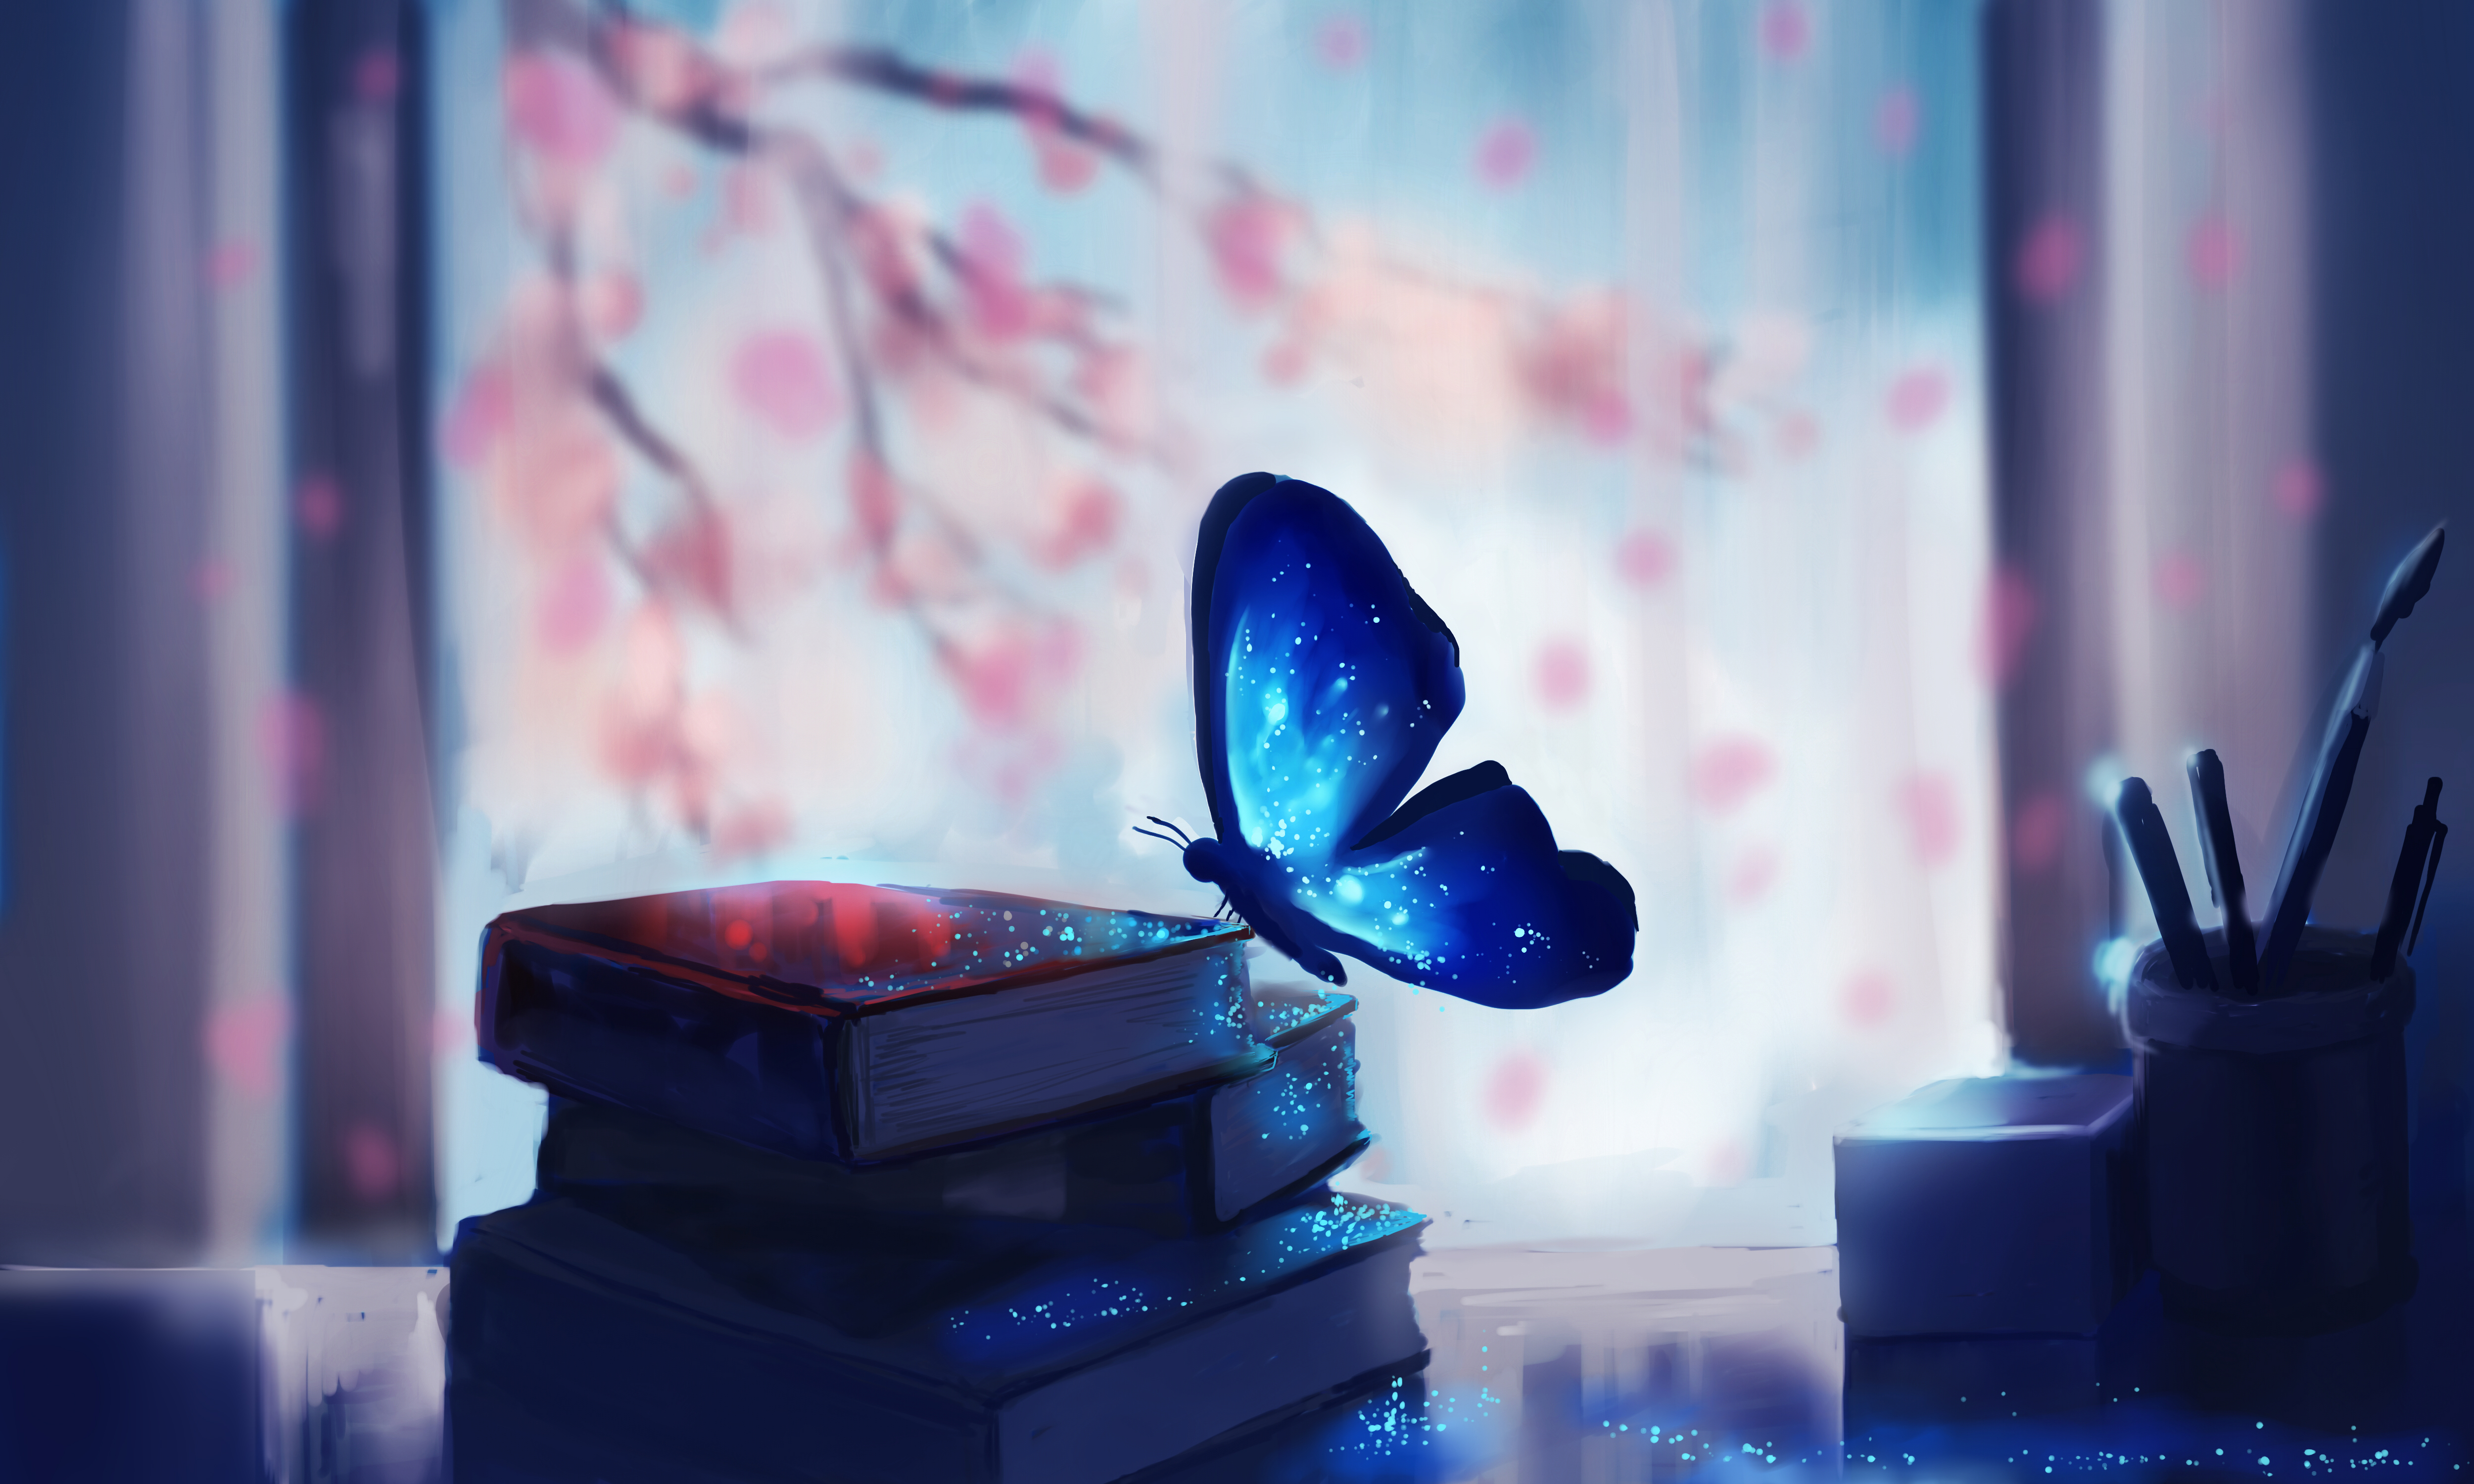 Free Butterfly Stock Wallpapers